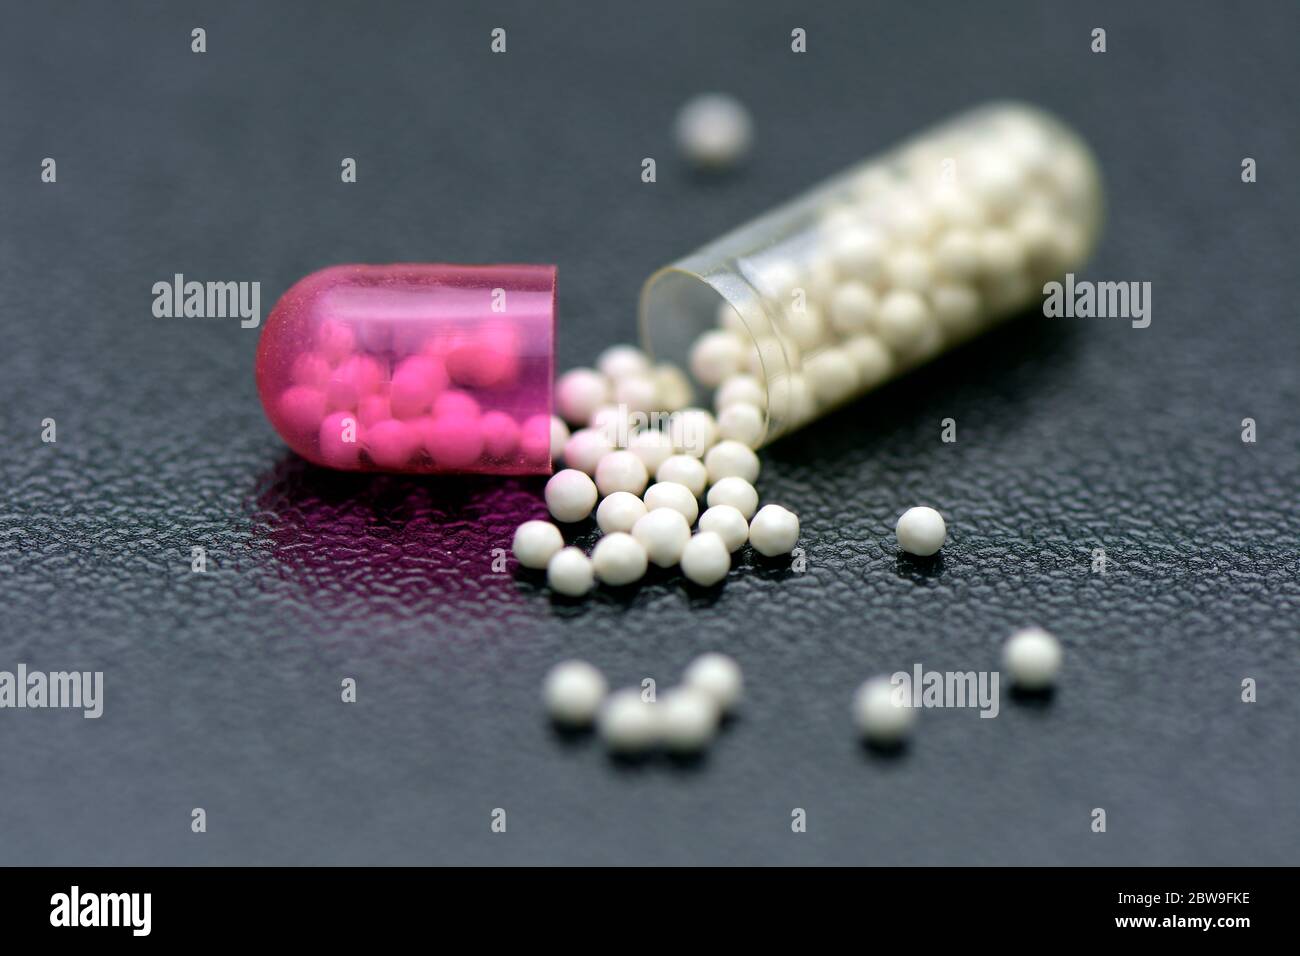 Transparent capsule with sustained release granule. Pellets in transparent hard gelatin capsule on dark background. Stock Photo